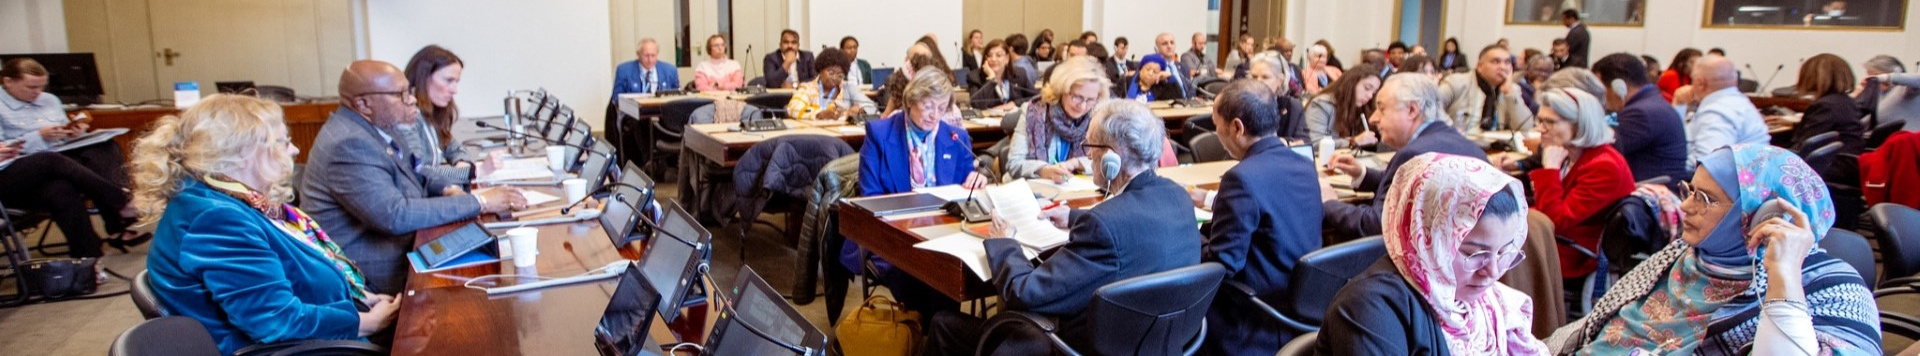 NGO representatives listening to a briefing by the President of the General Assembly, Dennis Francis, who is seen at one side of the room, together with UNOG Director General Tatiana Valovaya